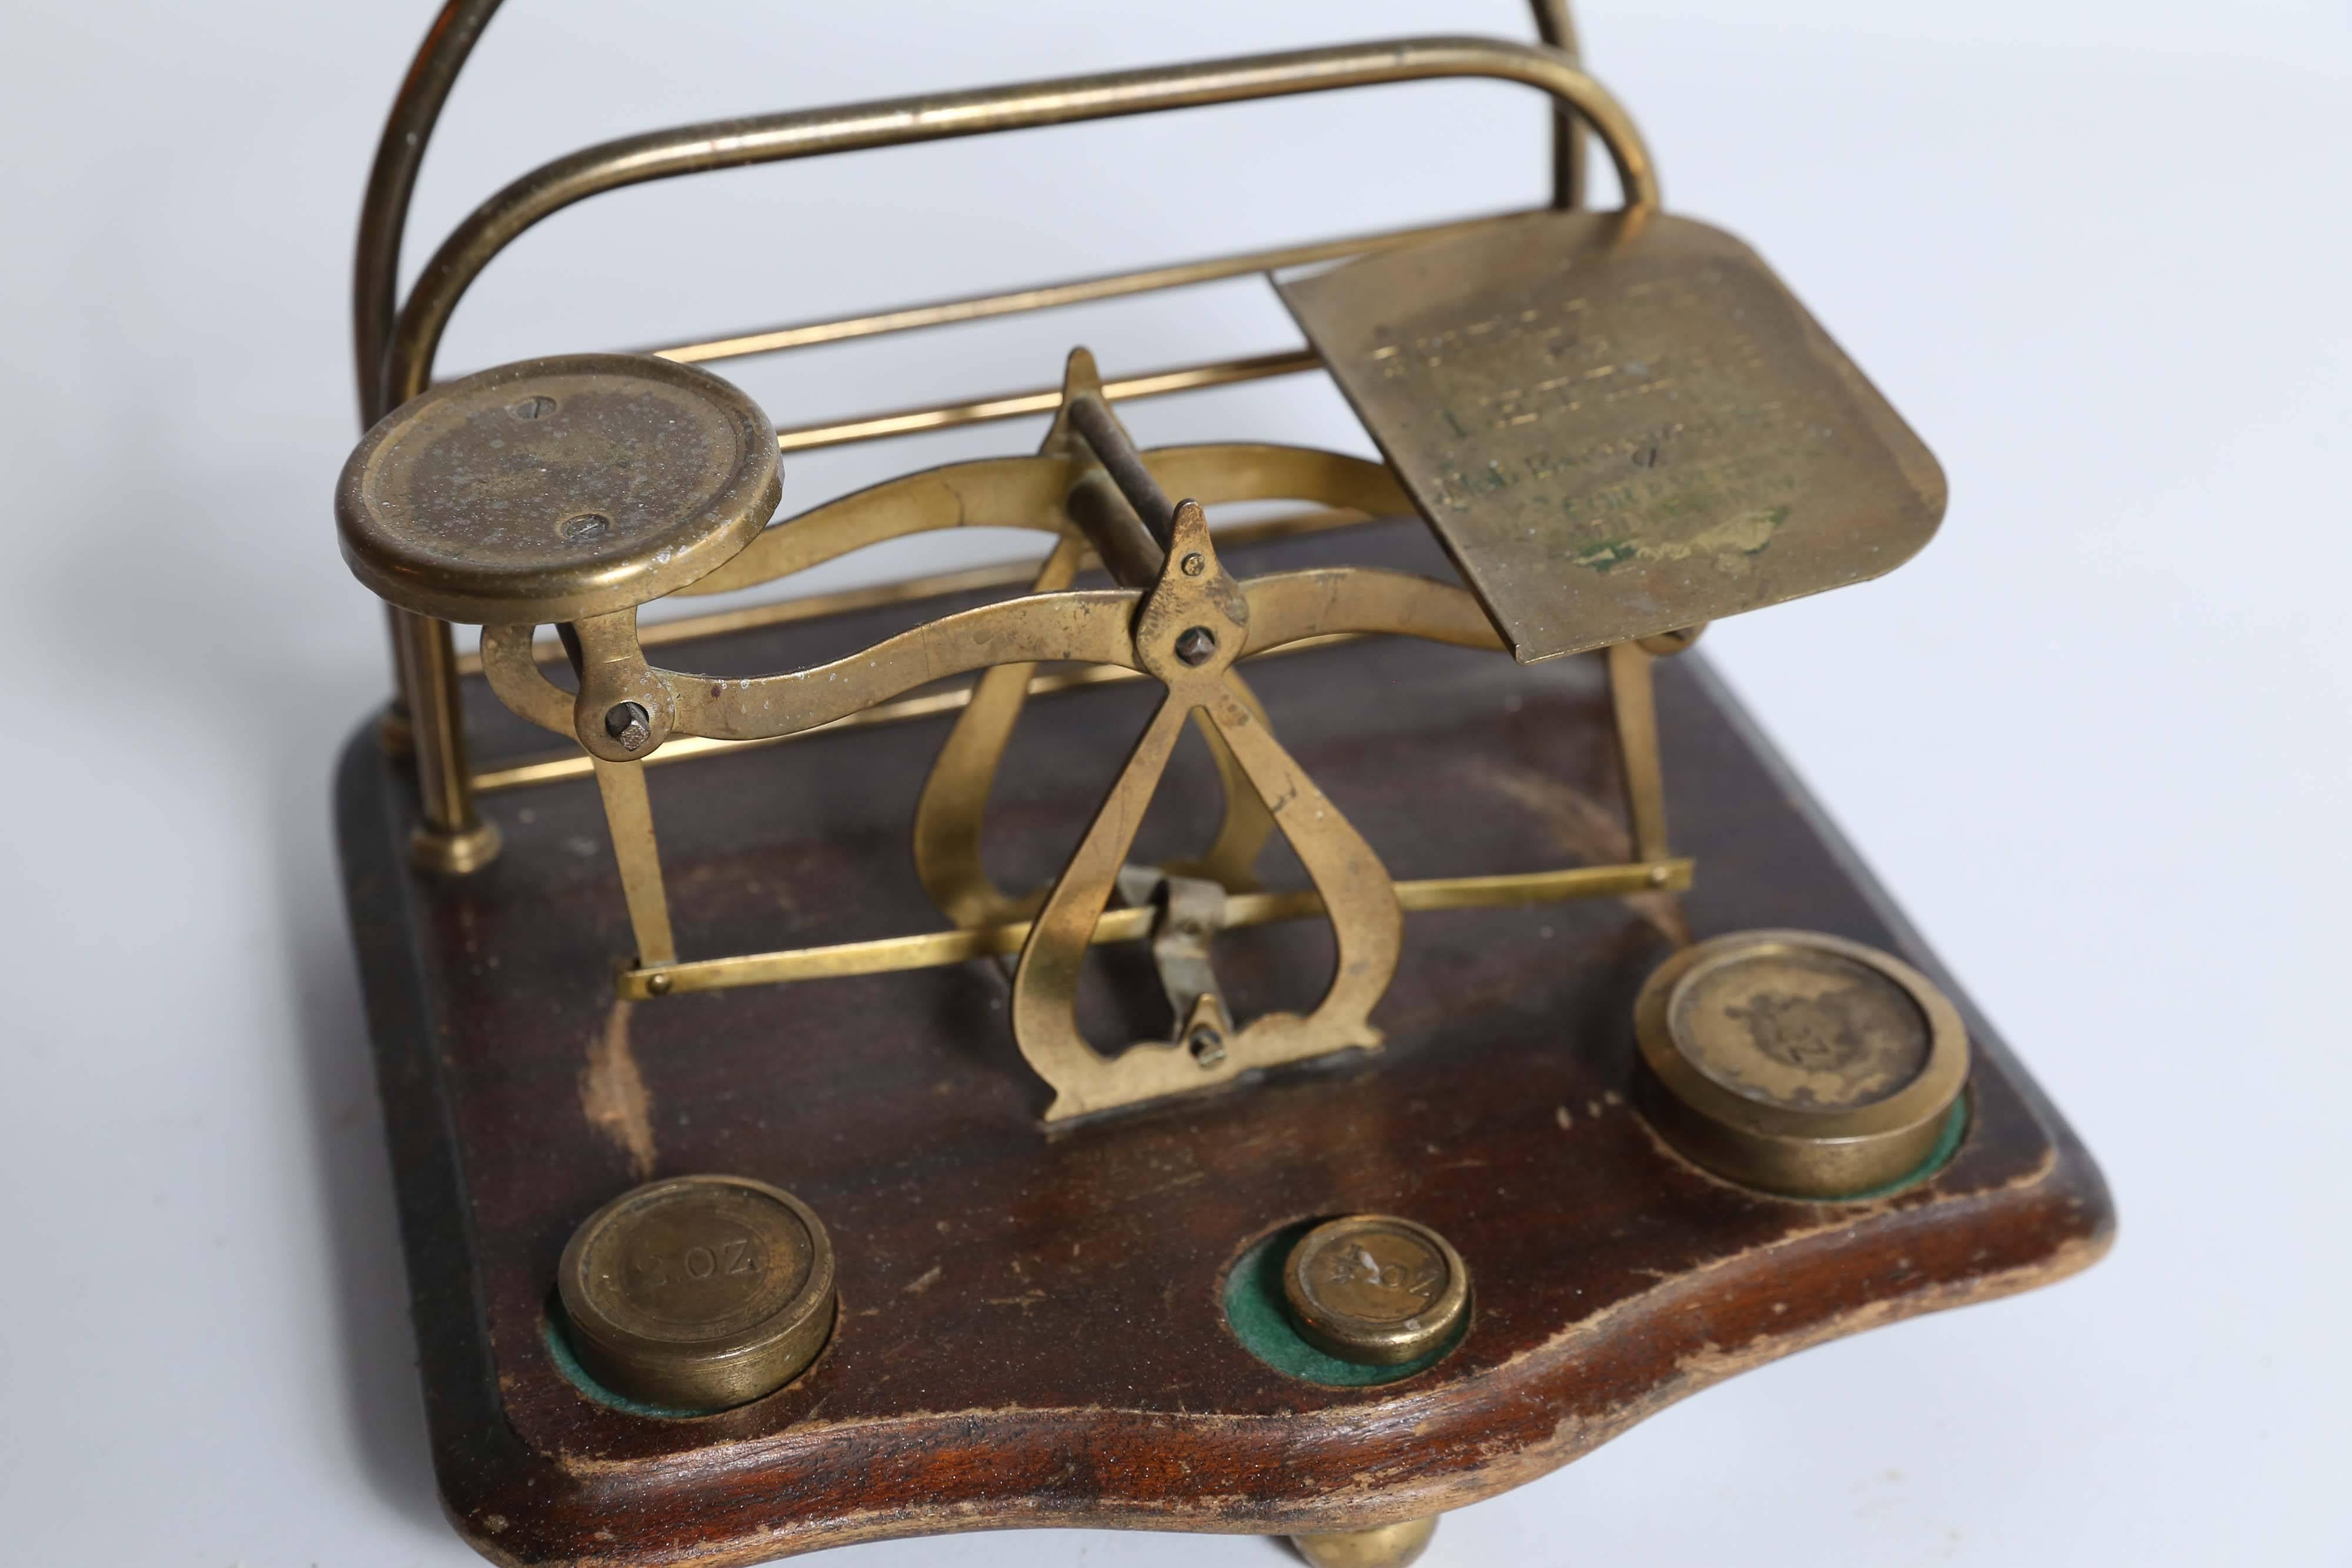 A mahogany and brass postage scale found in France but most likely British. Standing on three brass ball feet, the scale comes with three brass weights, 1/2 oz, 2 oz, and 4 oz, each of which rest in a recessed and felted slot. With a serpentine